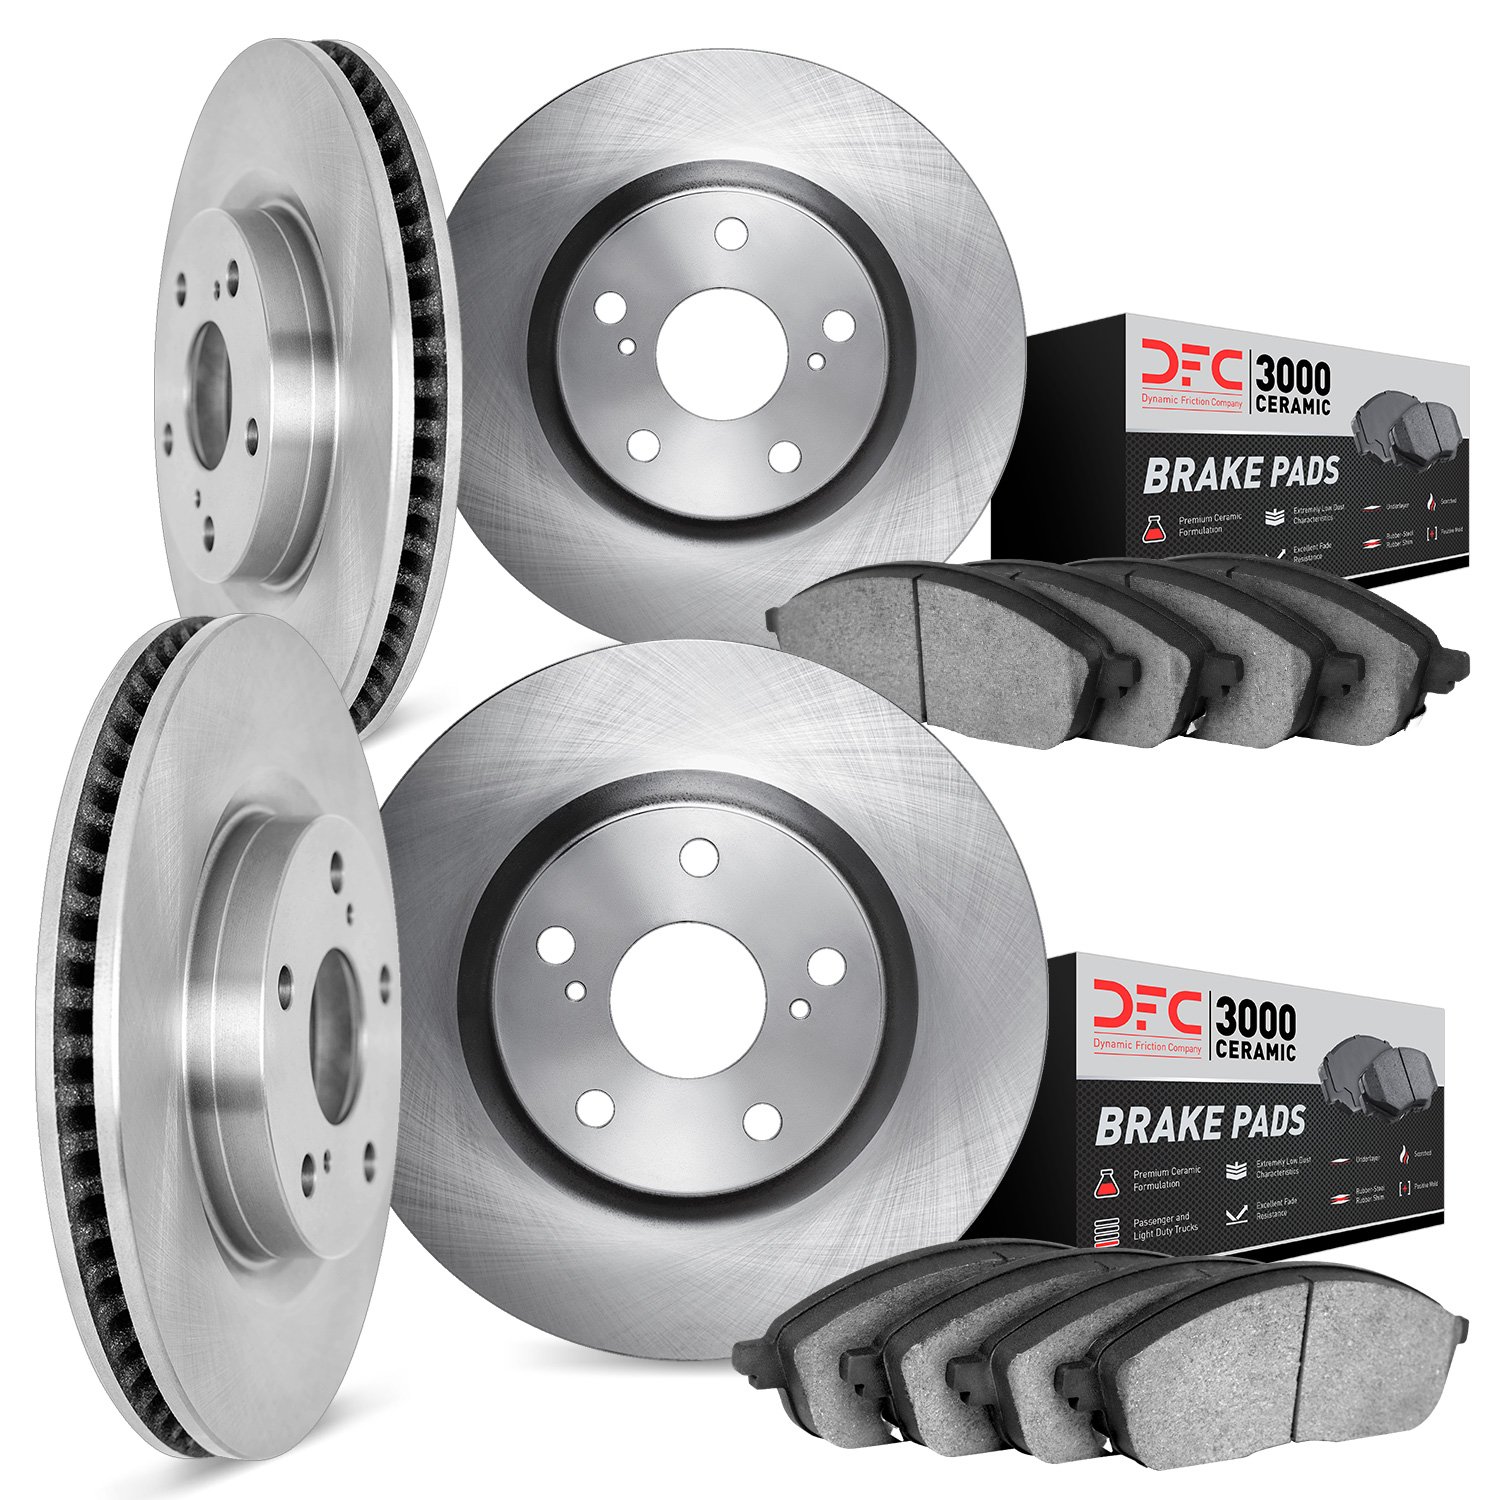 6304-42023 Brake Rotors with 3000-Series Ceramic Brake Pads Kit, Fits Select Mopar, Position: Front and Rear